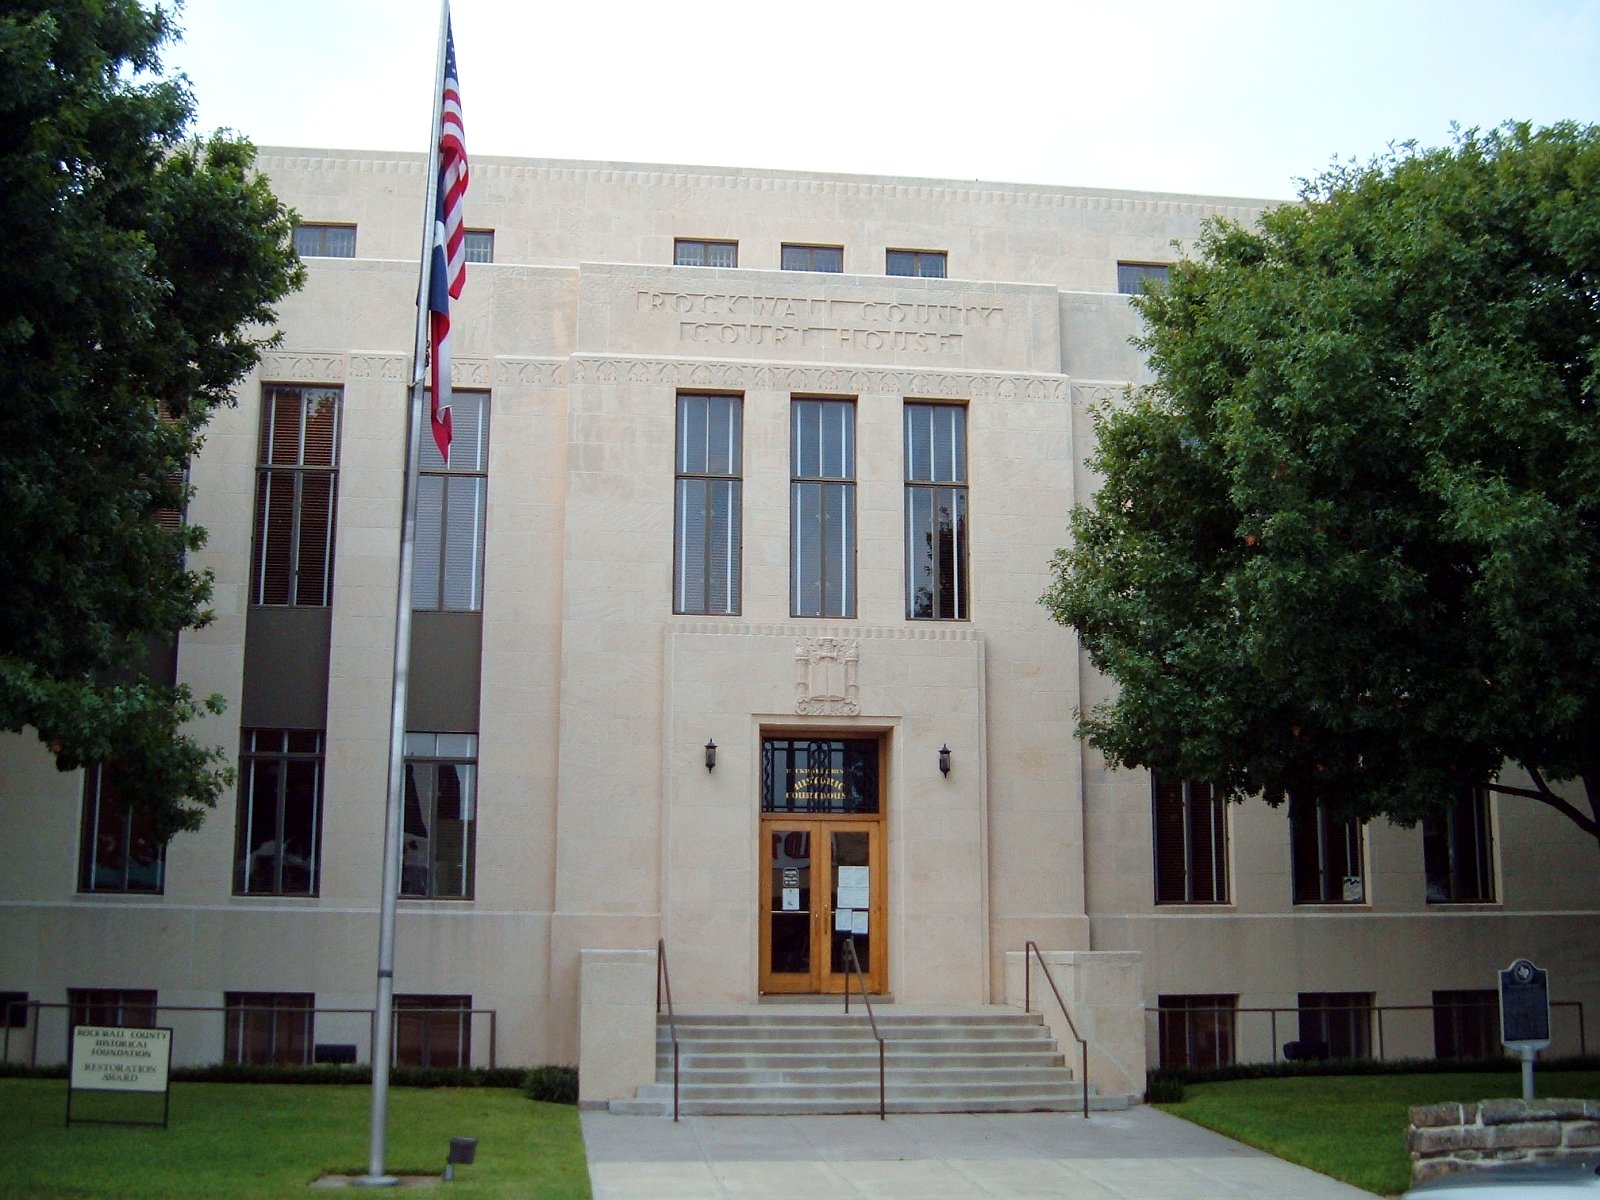 Troy #39 s Photos: Texas Courthouses 09663 Rockwall County Courthouse in